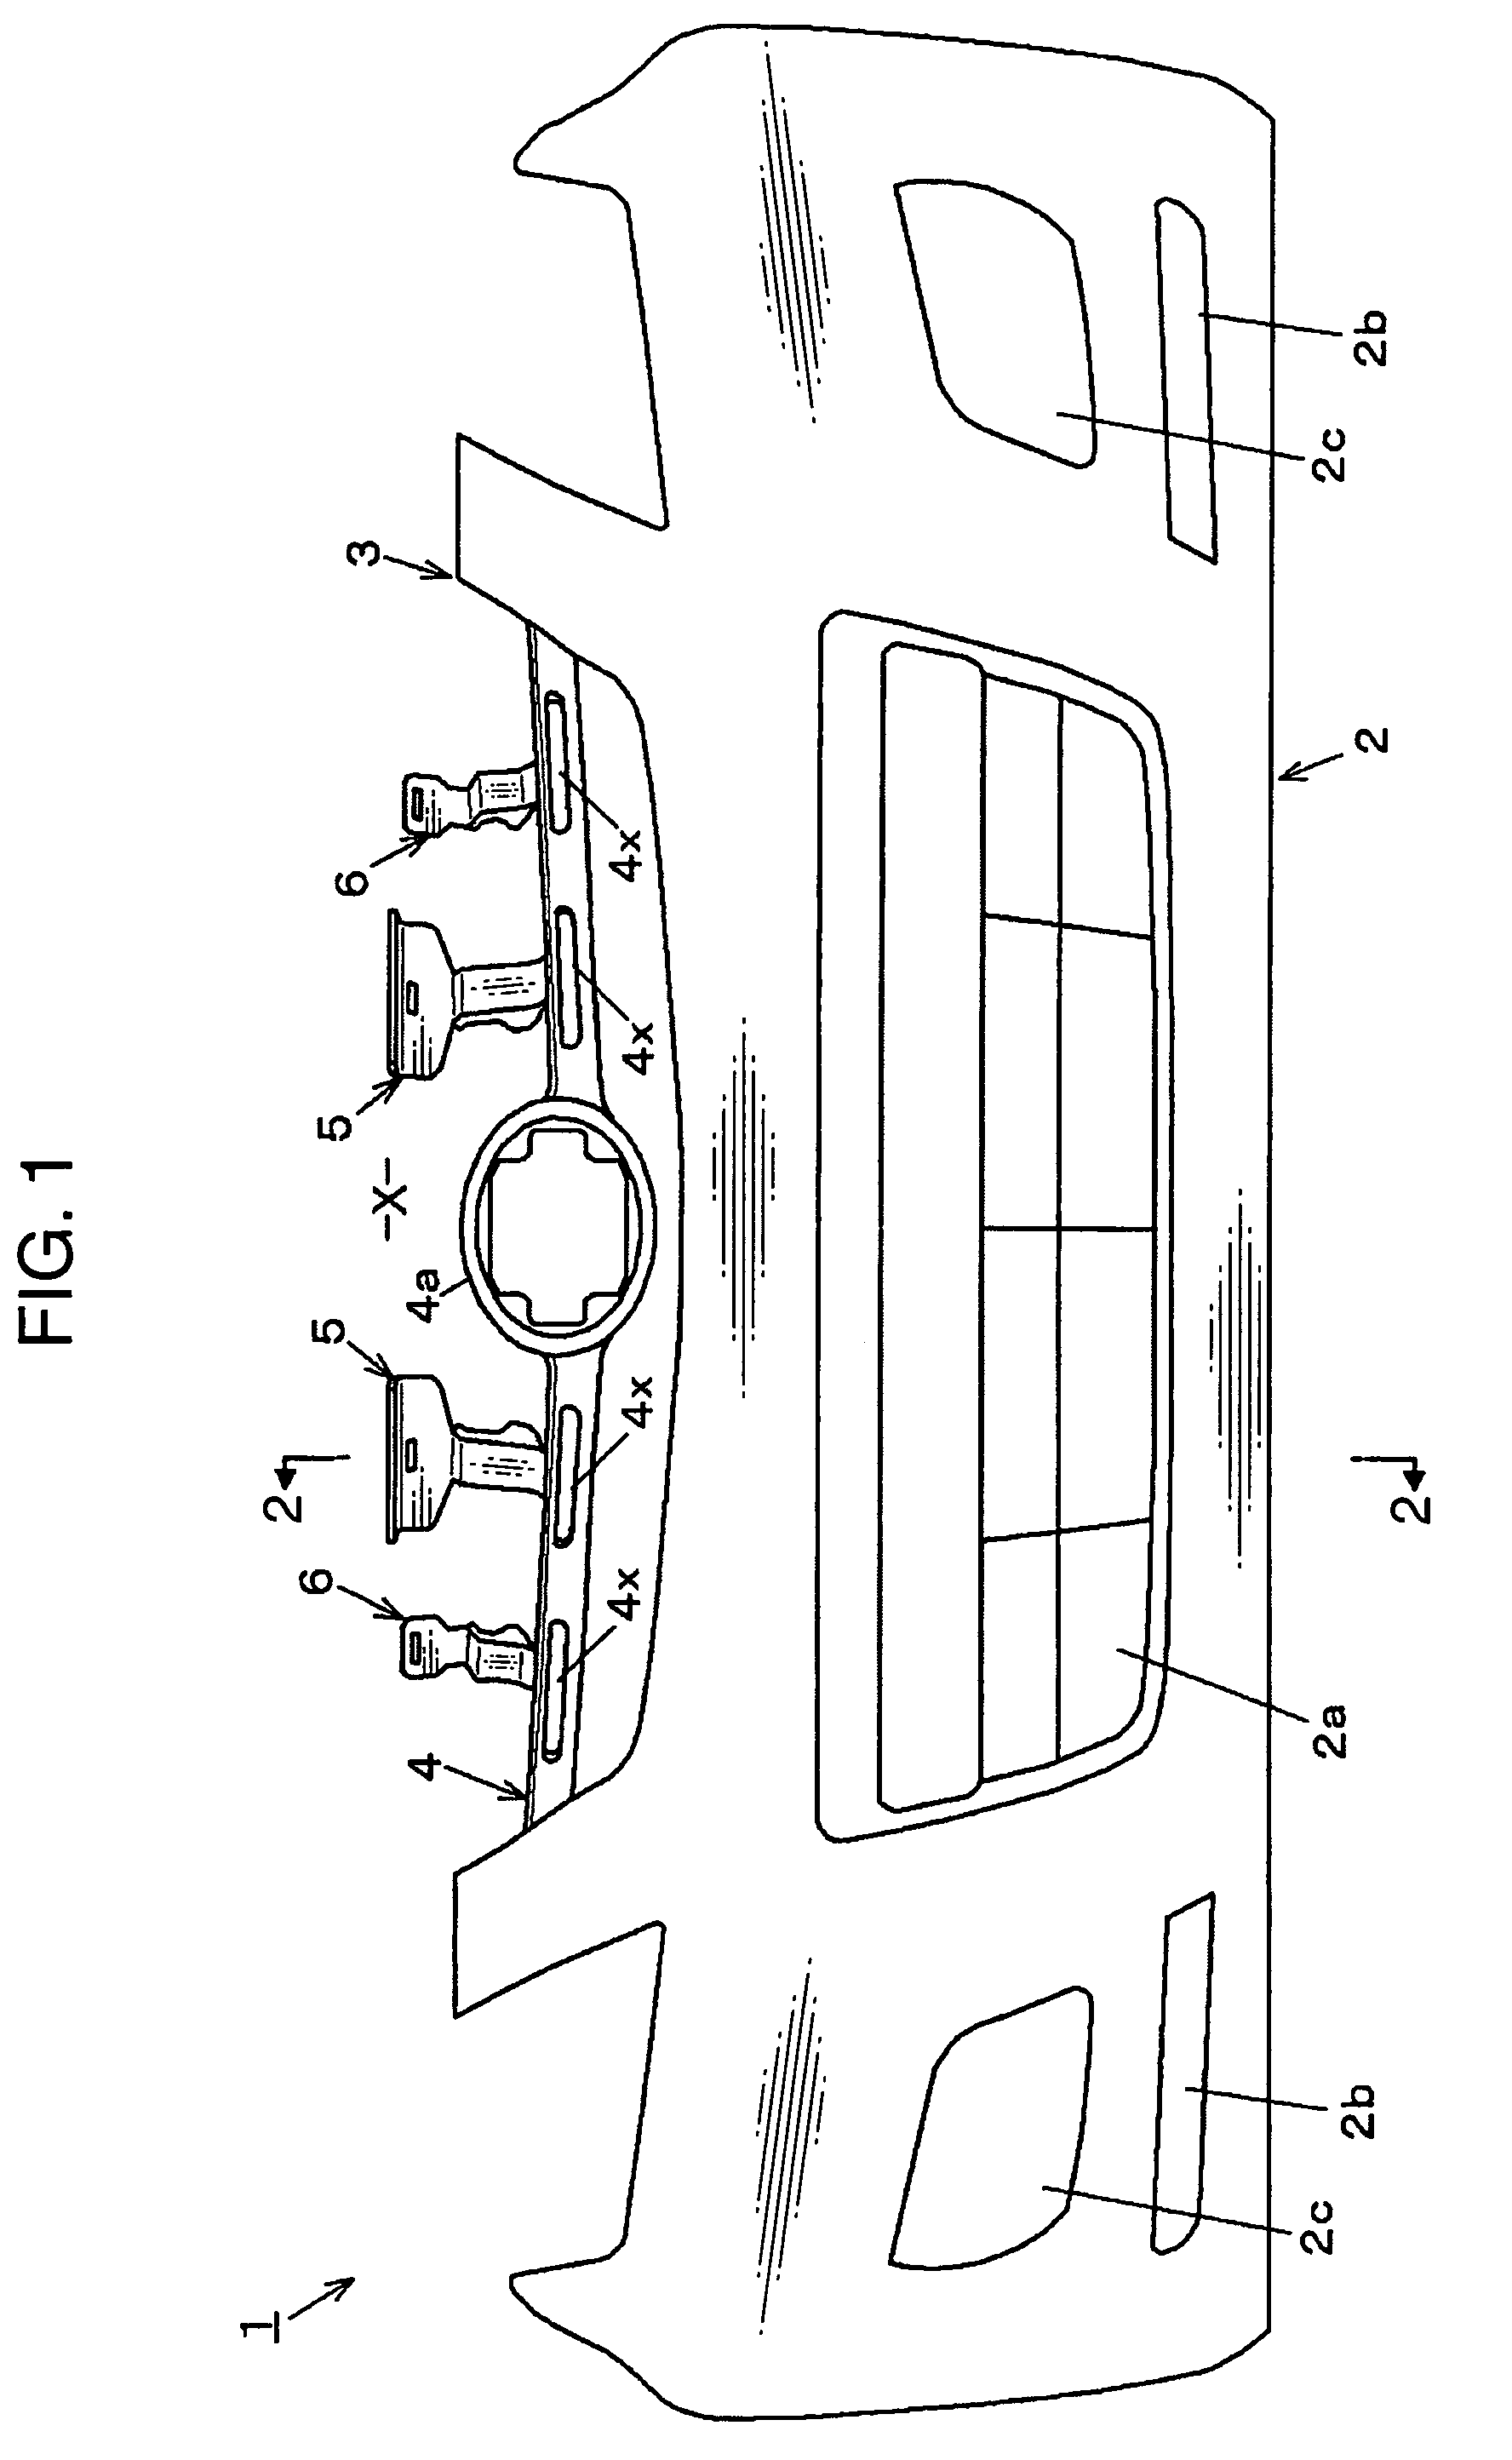 Bumper structure for vehicle